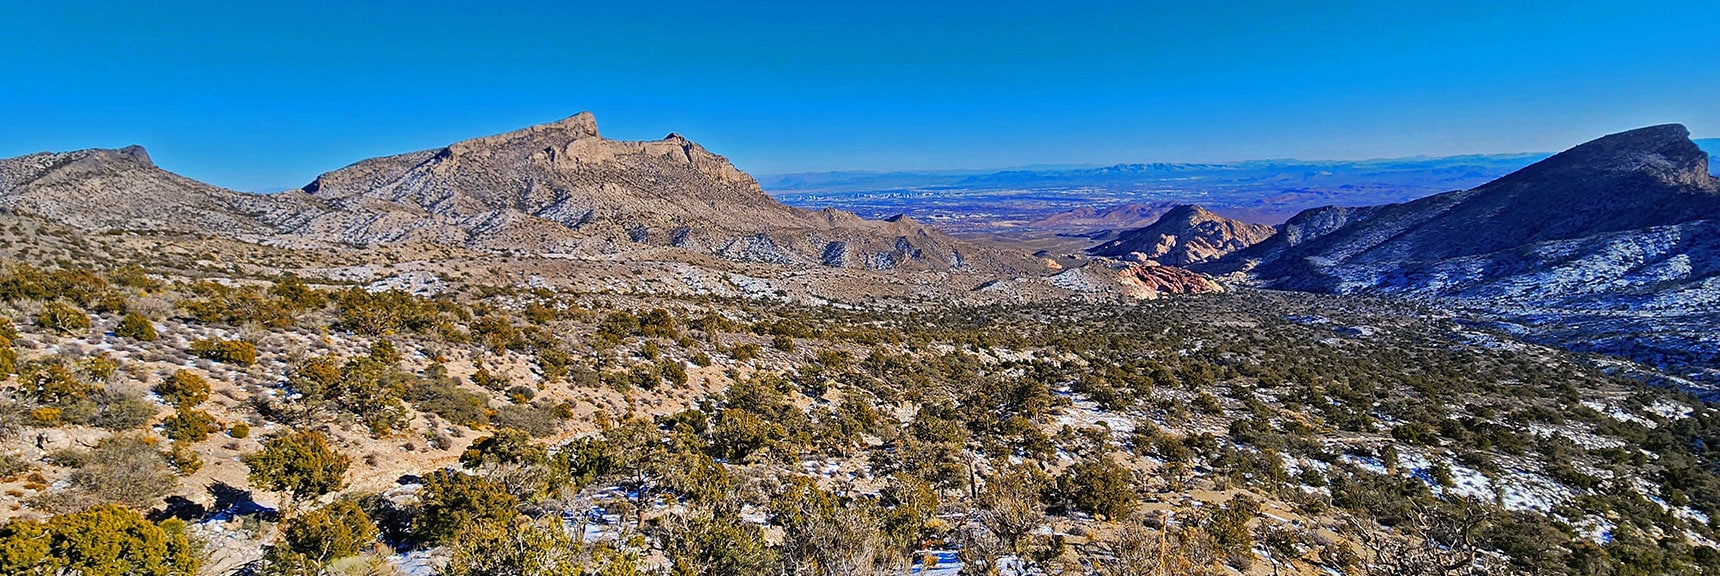 Spectacular View Down Entire Brownstone Basin to Las Vegas Valley | 3 Basin Circuit | Calico Basin, Brownstone Basin, Red Rock Canyon, Nevada